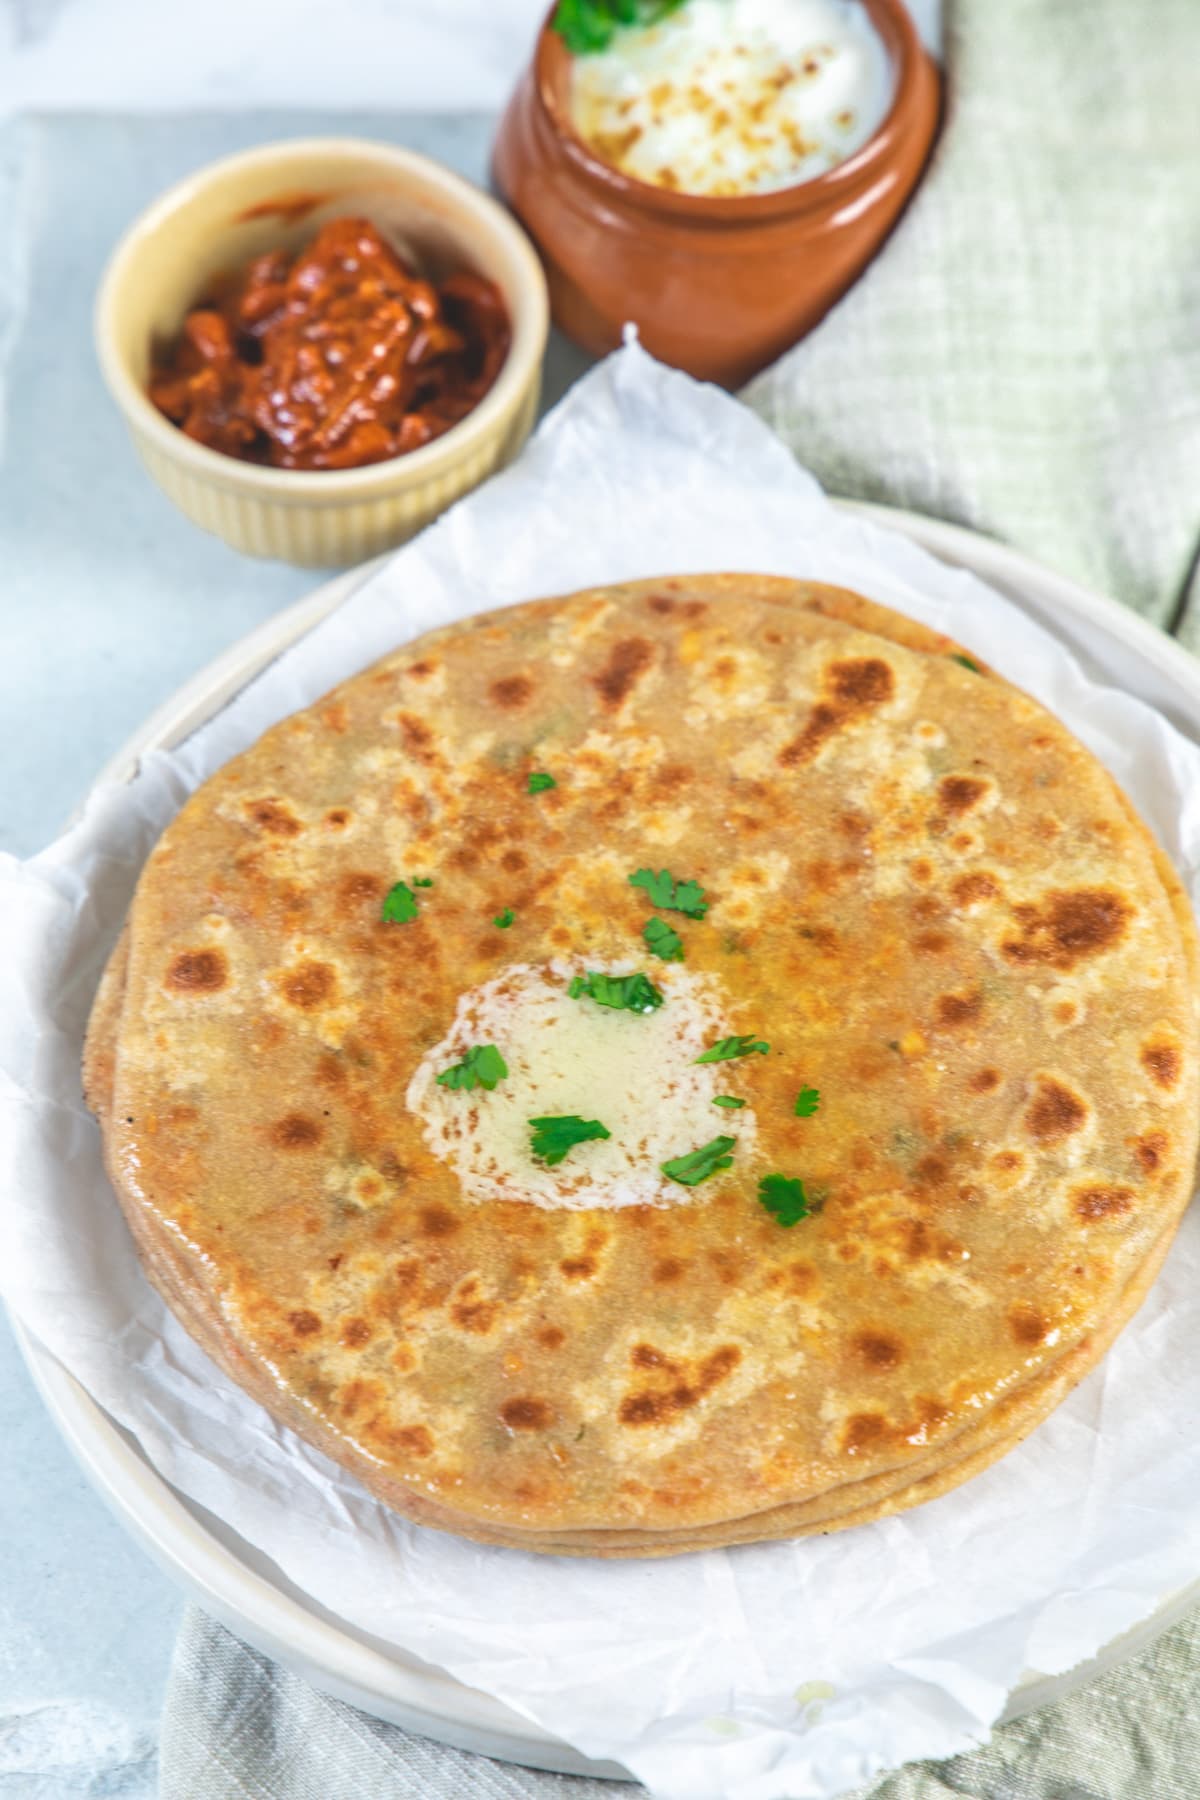 Paneer paratha topped with butter and side of pickle and yogurt.